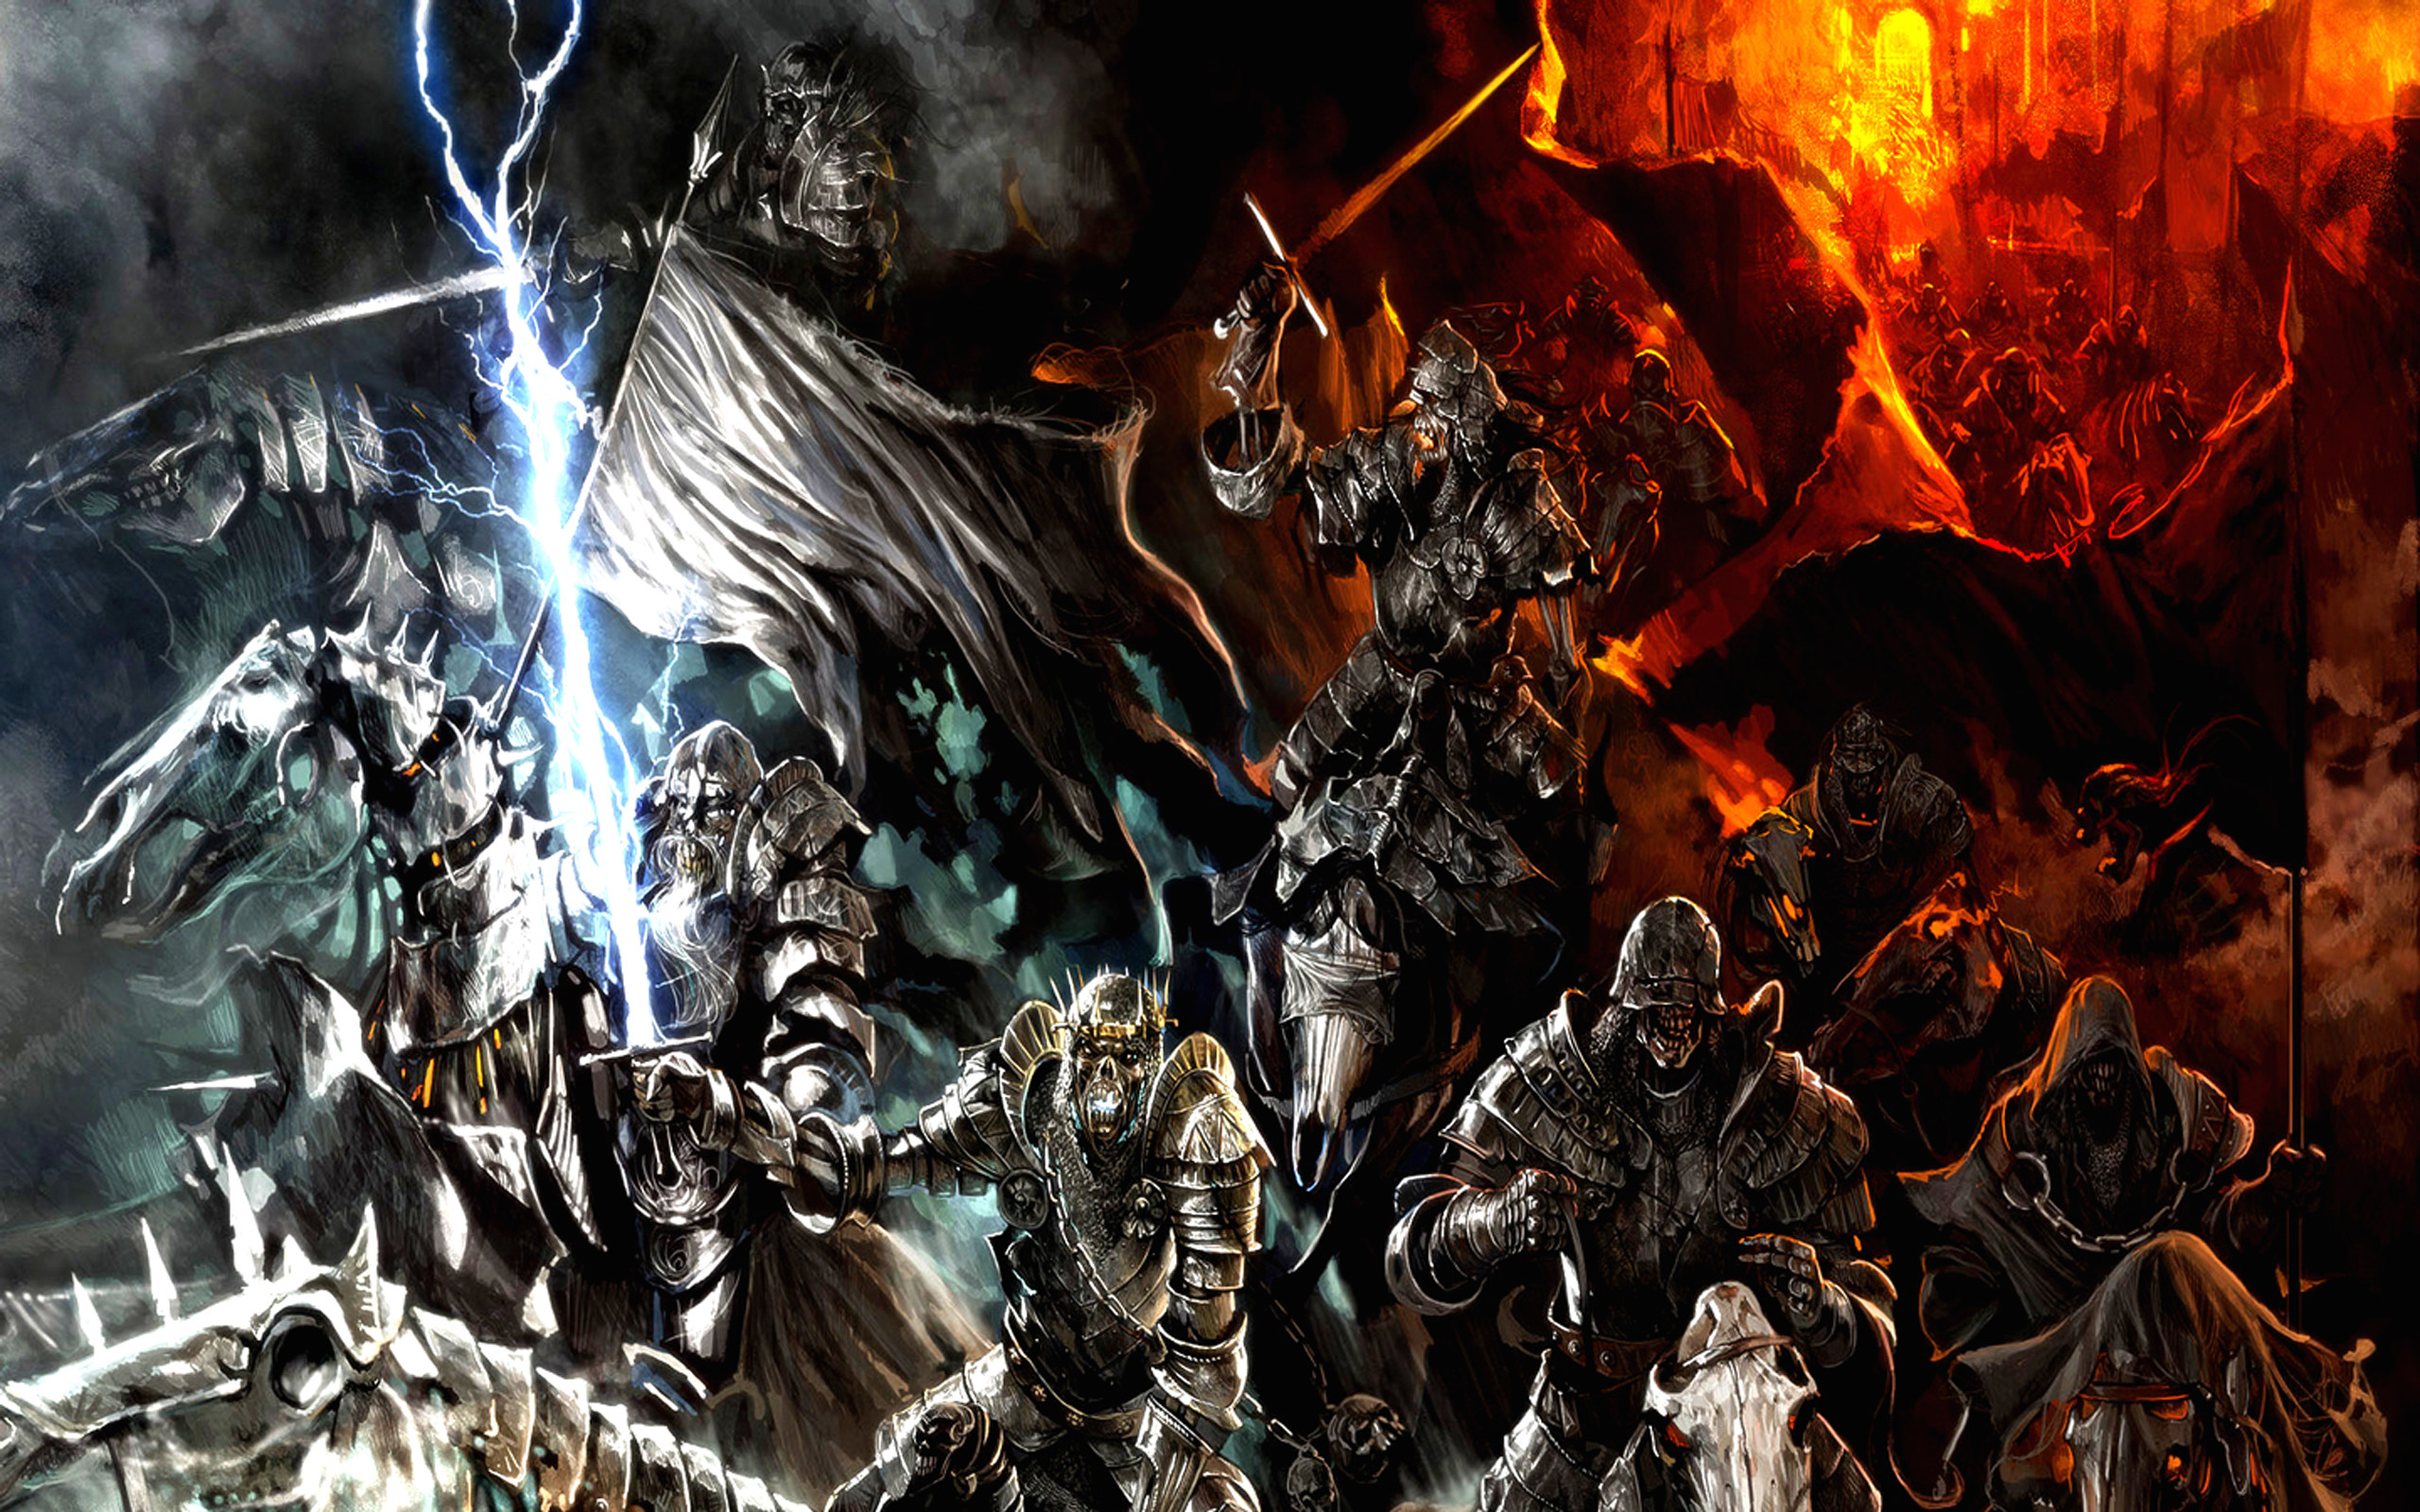 epic battle wallpaper,action adventure game,cg artwork,demon,strategy video game,pc game